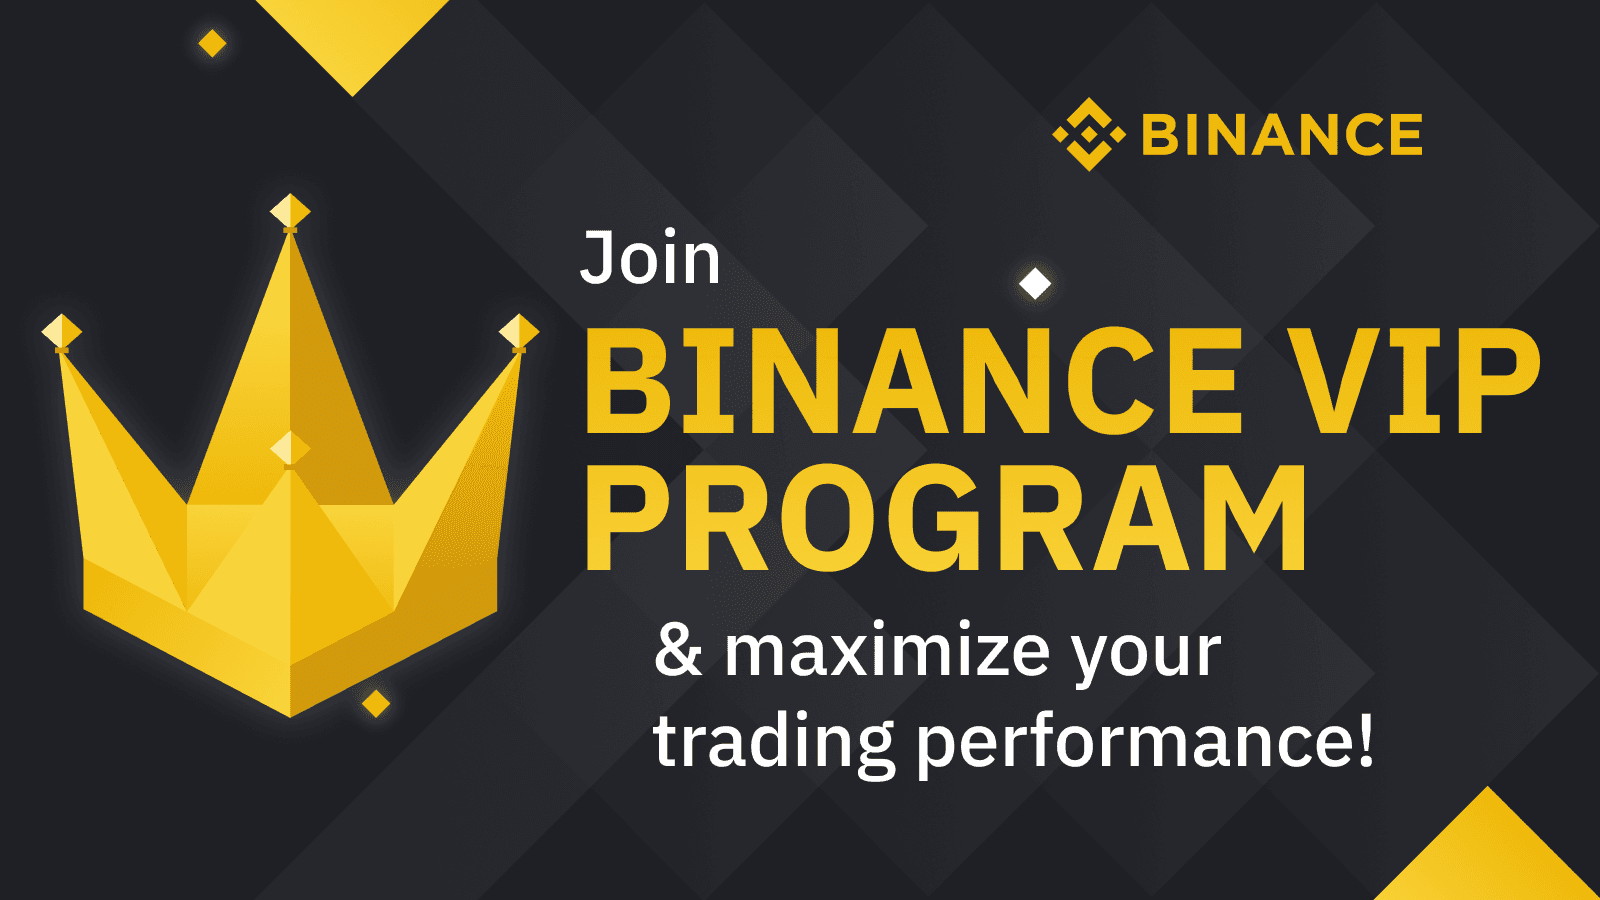 Become a VIP Trader on Binance and Enjoy Unique Benefits